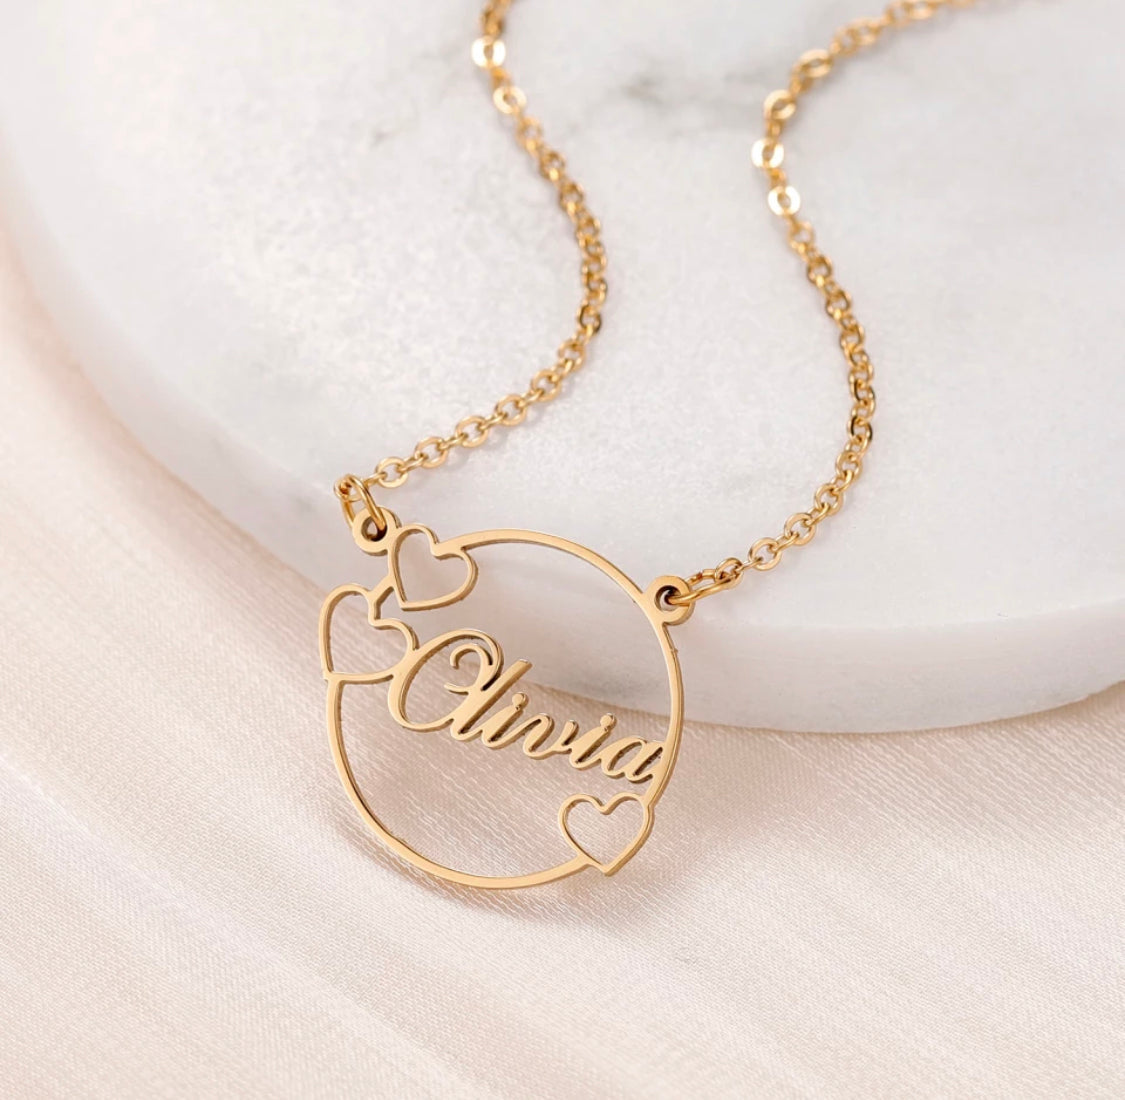 Kids The Olivia heart necklace